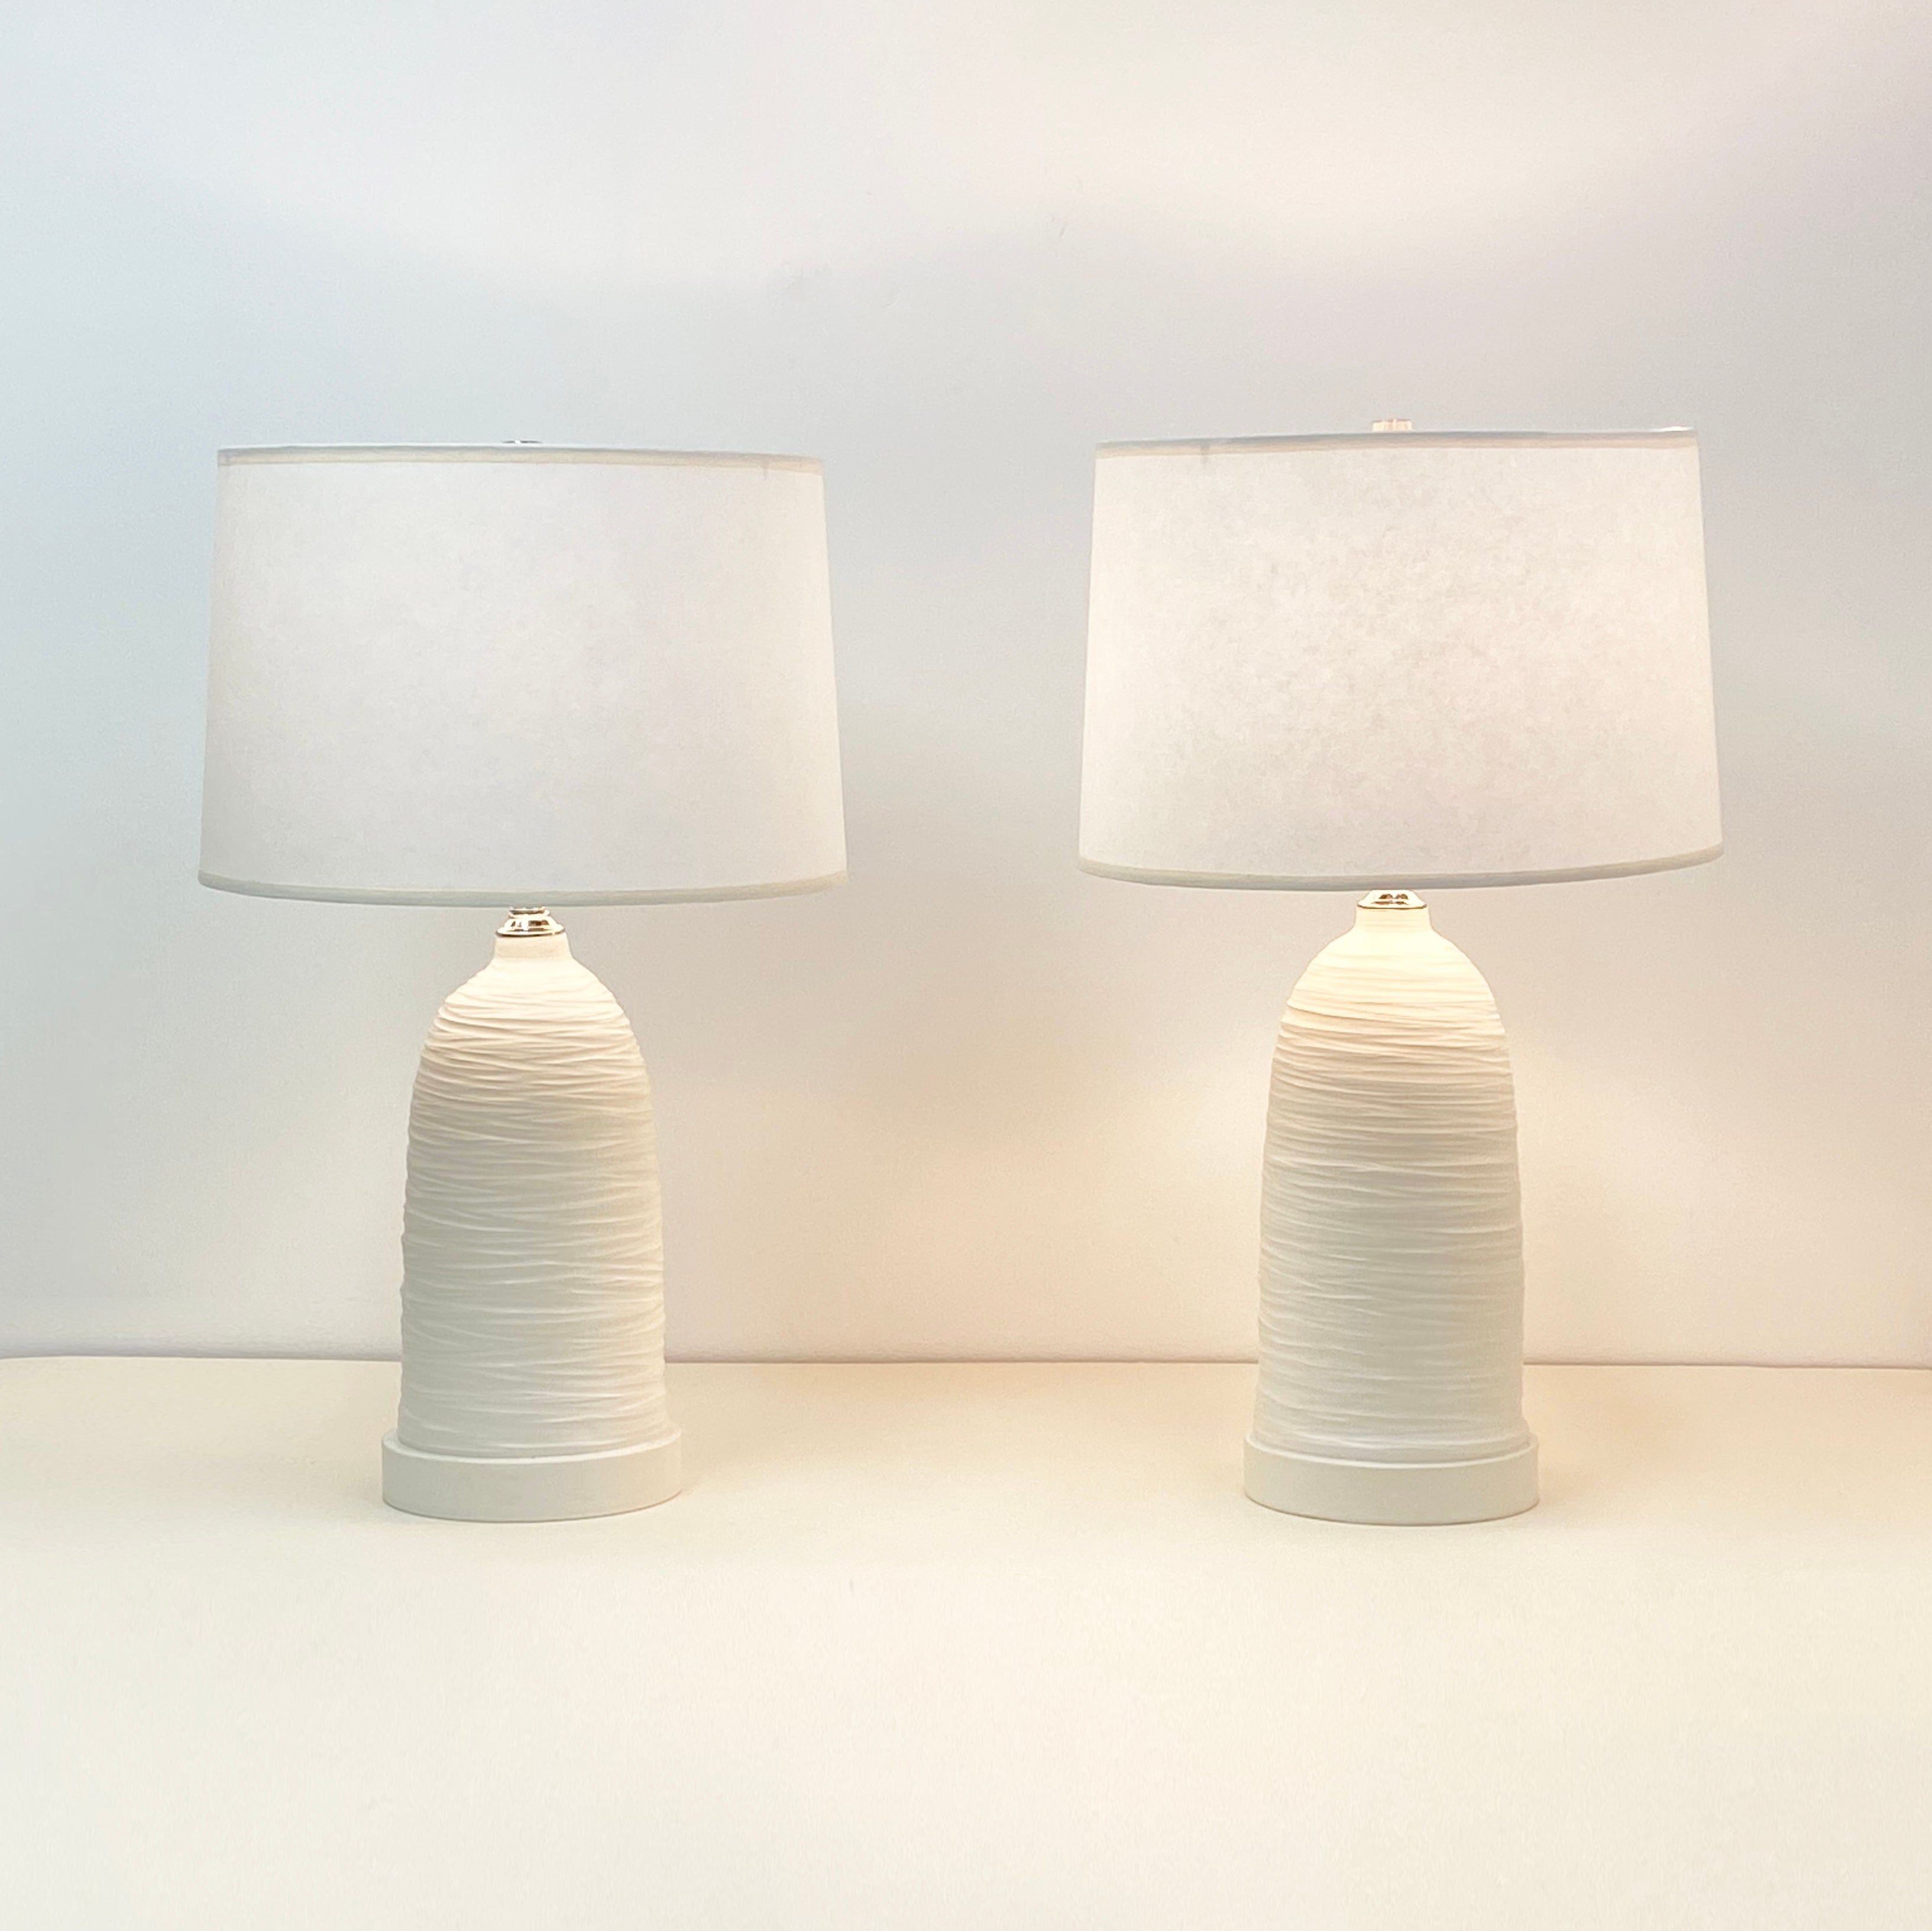 Handmade Wheel-thrown Large Lamp pair Textured deco by Olivia Barry / By Hand